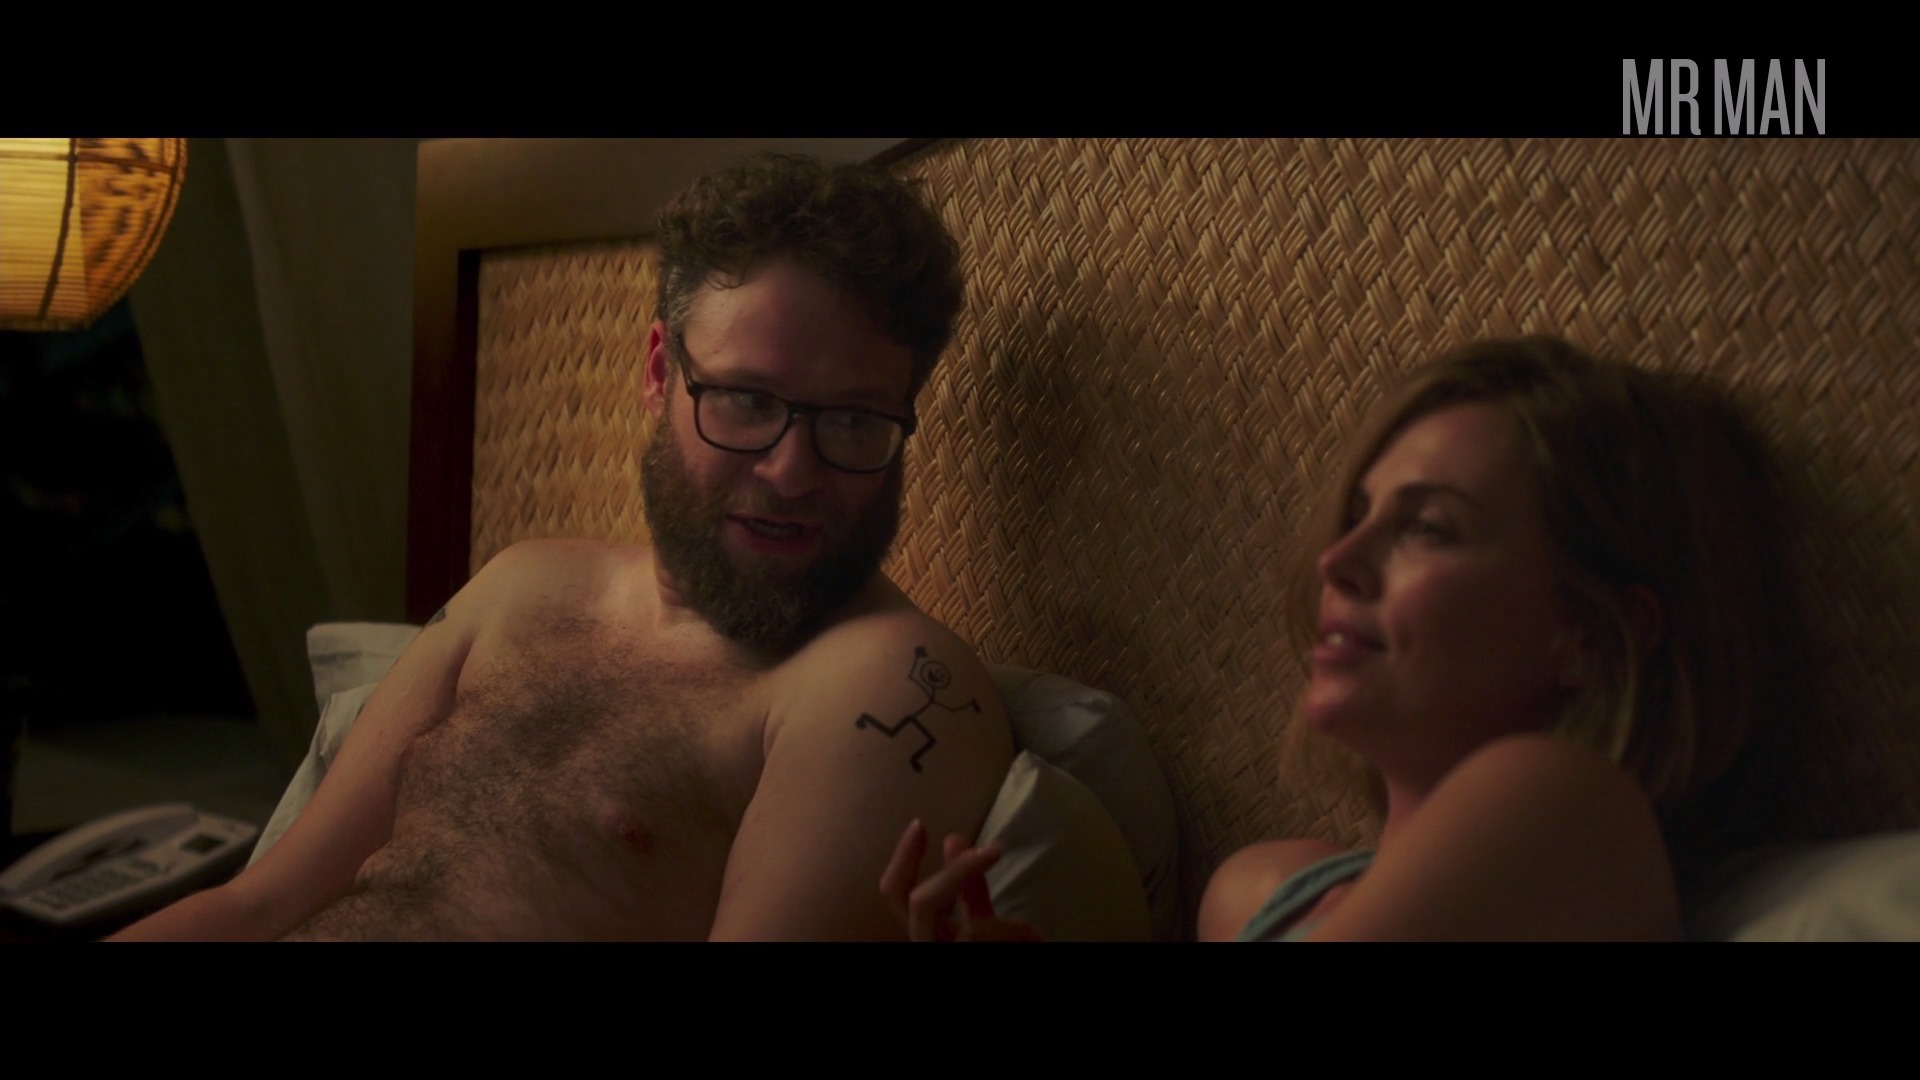 Seth Rogen is skintastic in this sexy scene! 